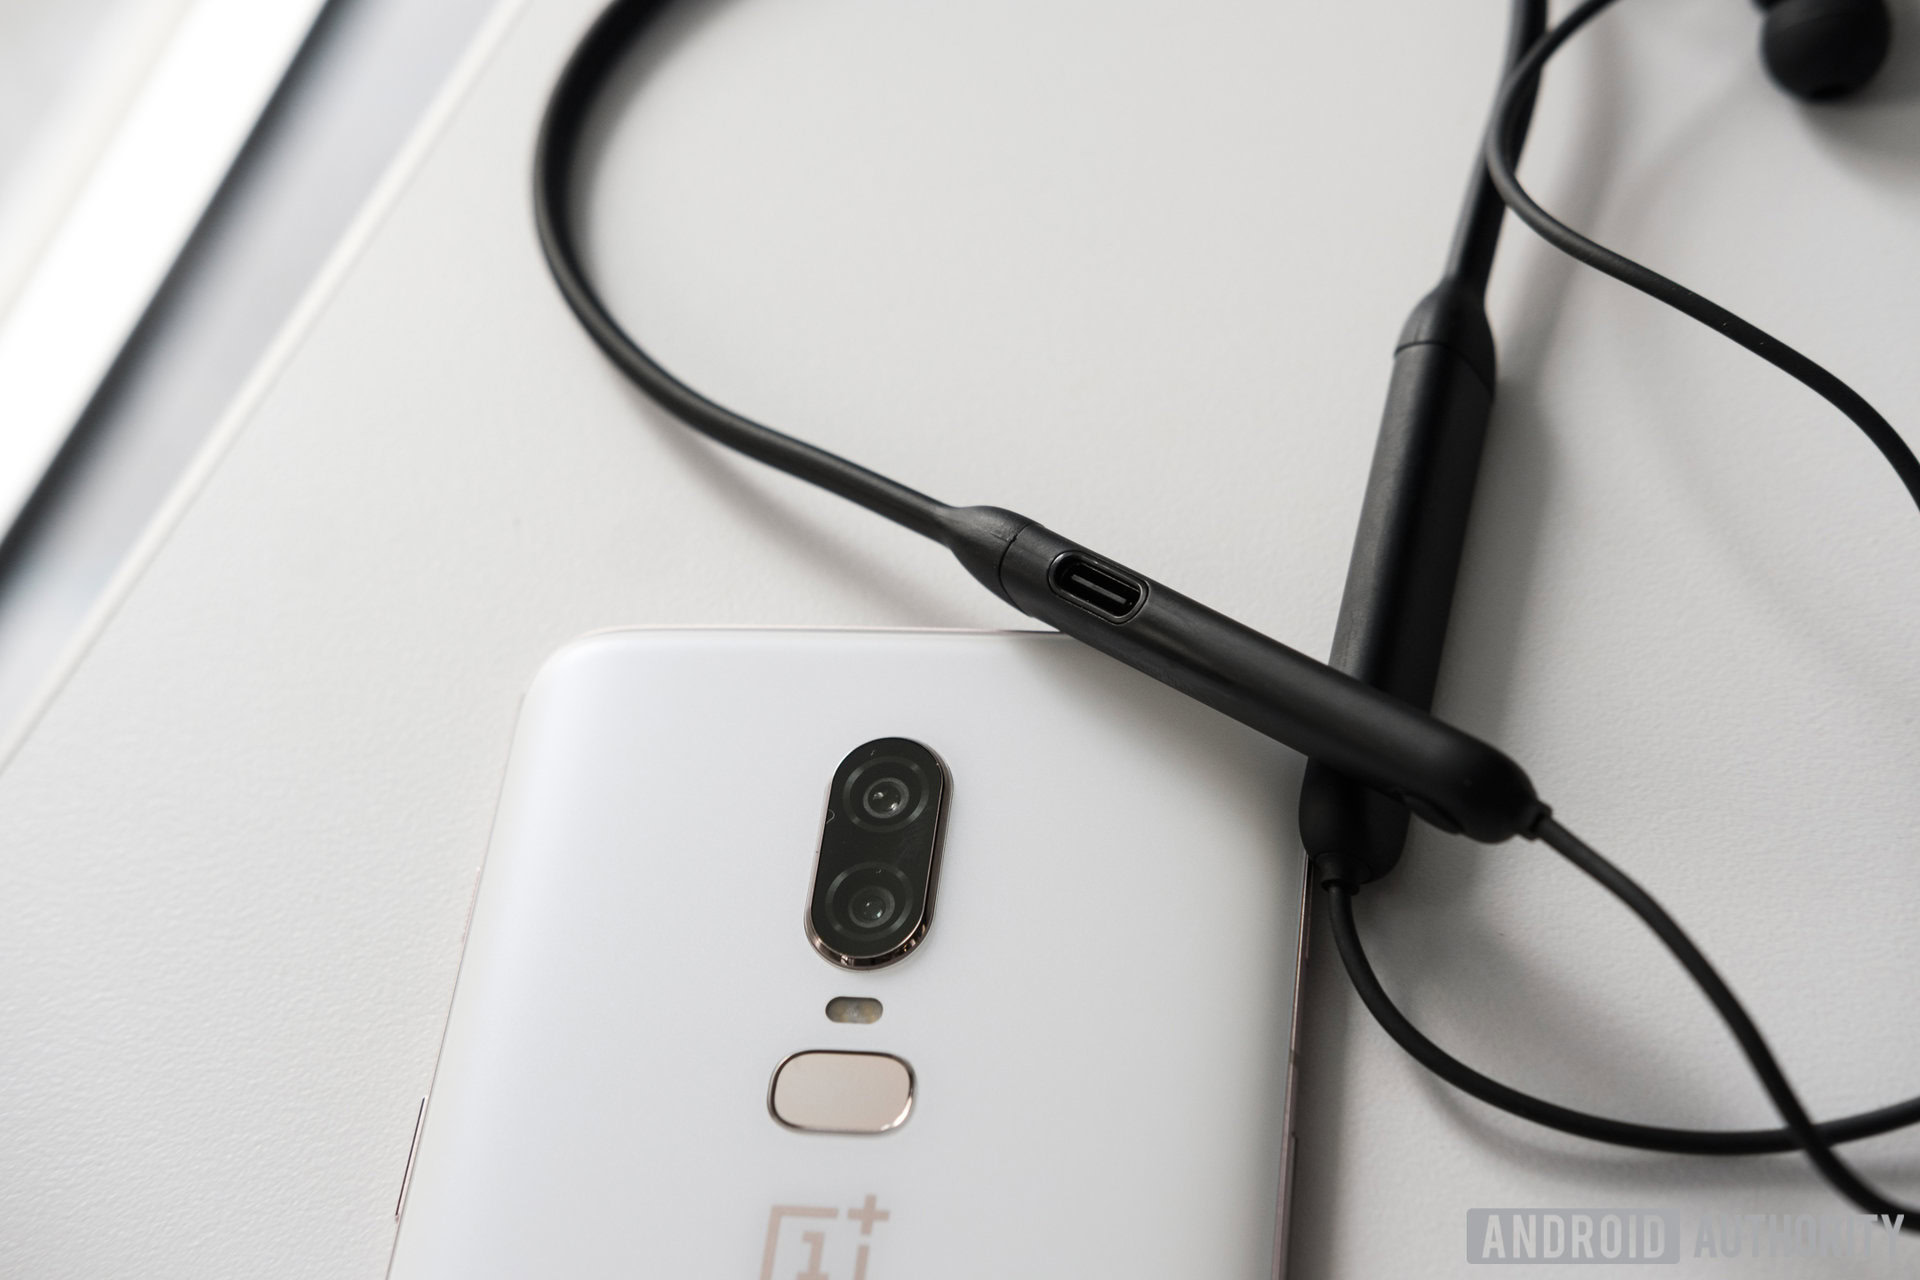 OnePlus Bullets Wireless: Official price, release date, and features2160 x 1440